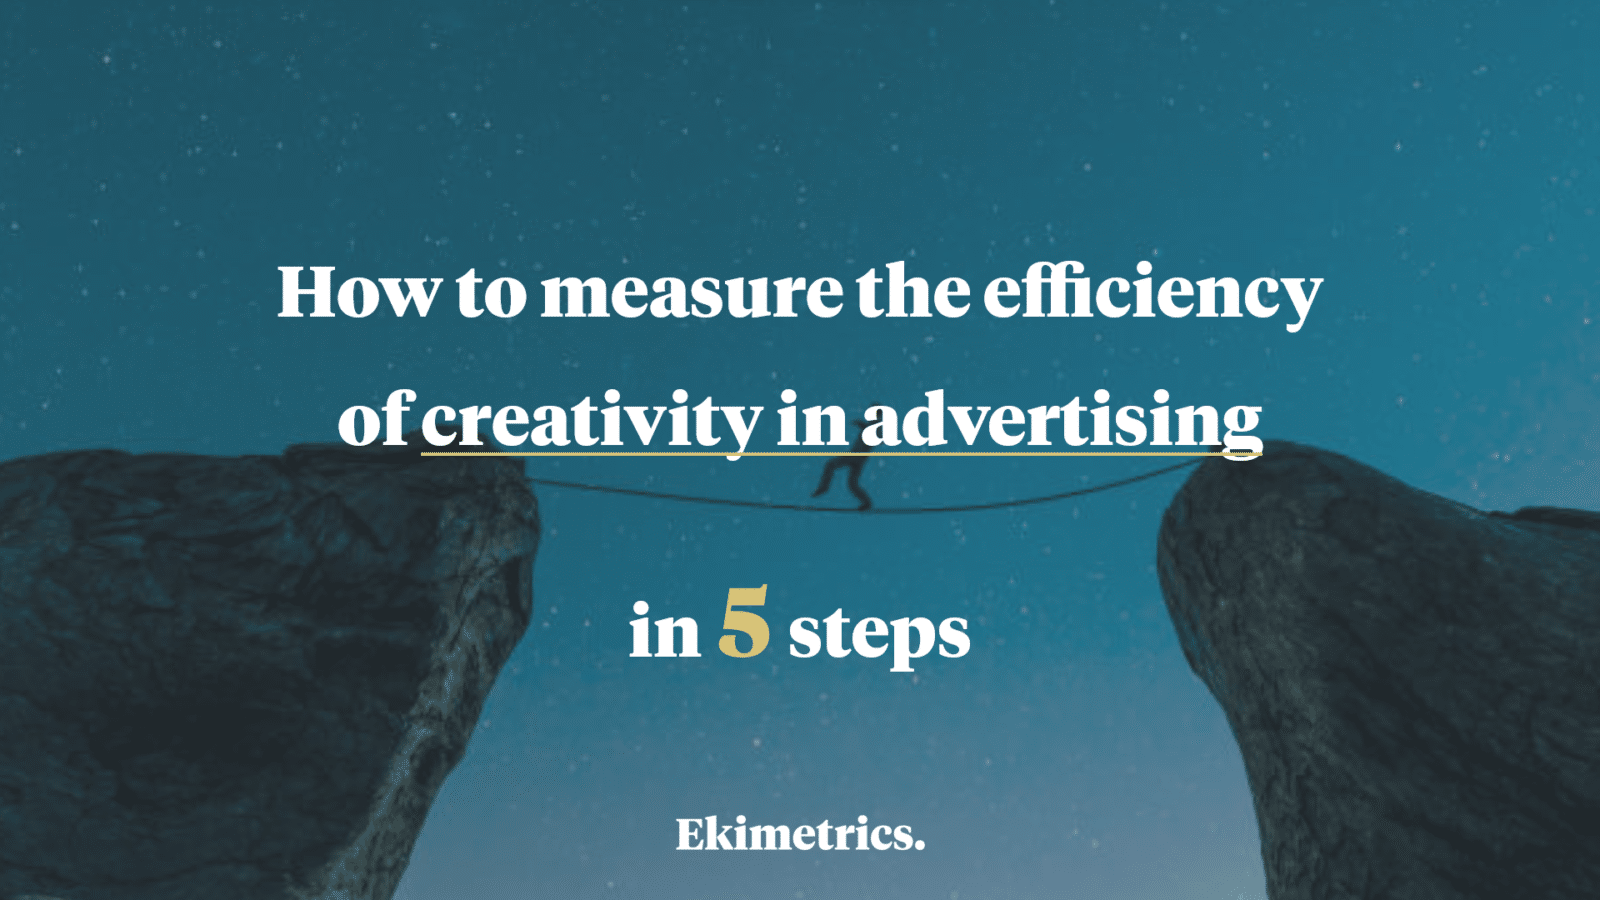 How to measure the efficiency of creativity in advertising in 5 steps?